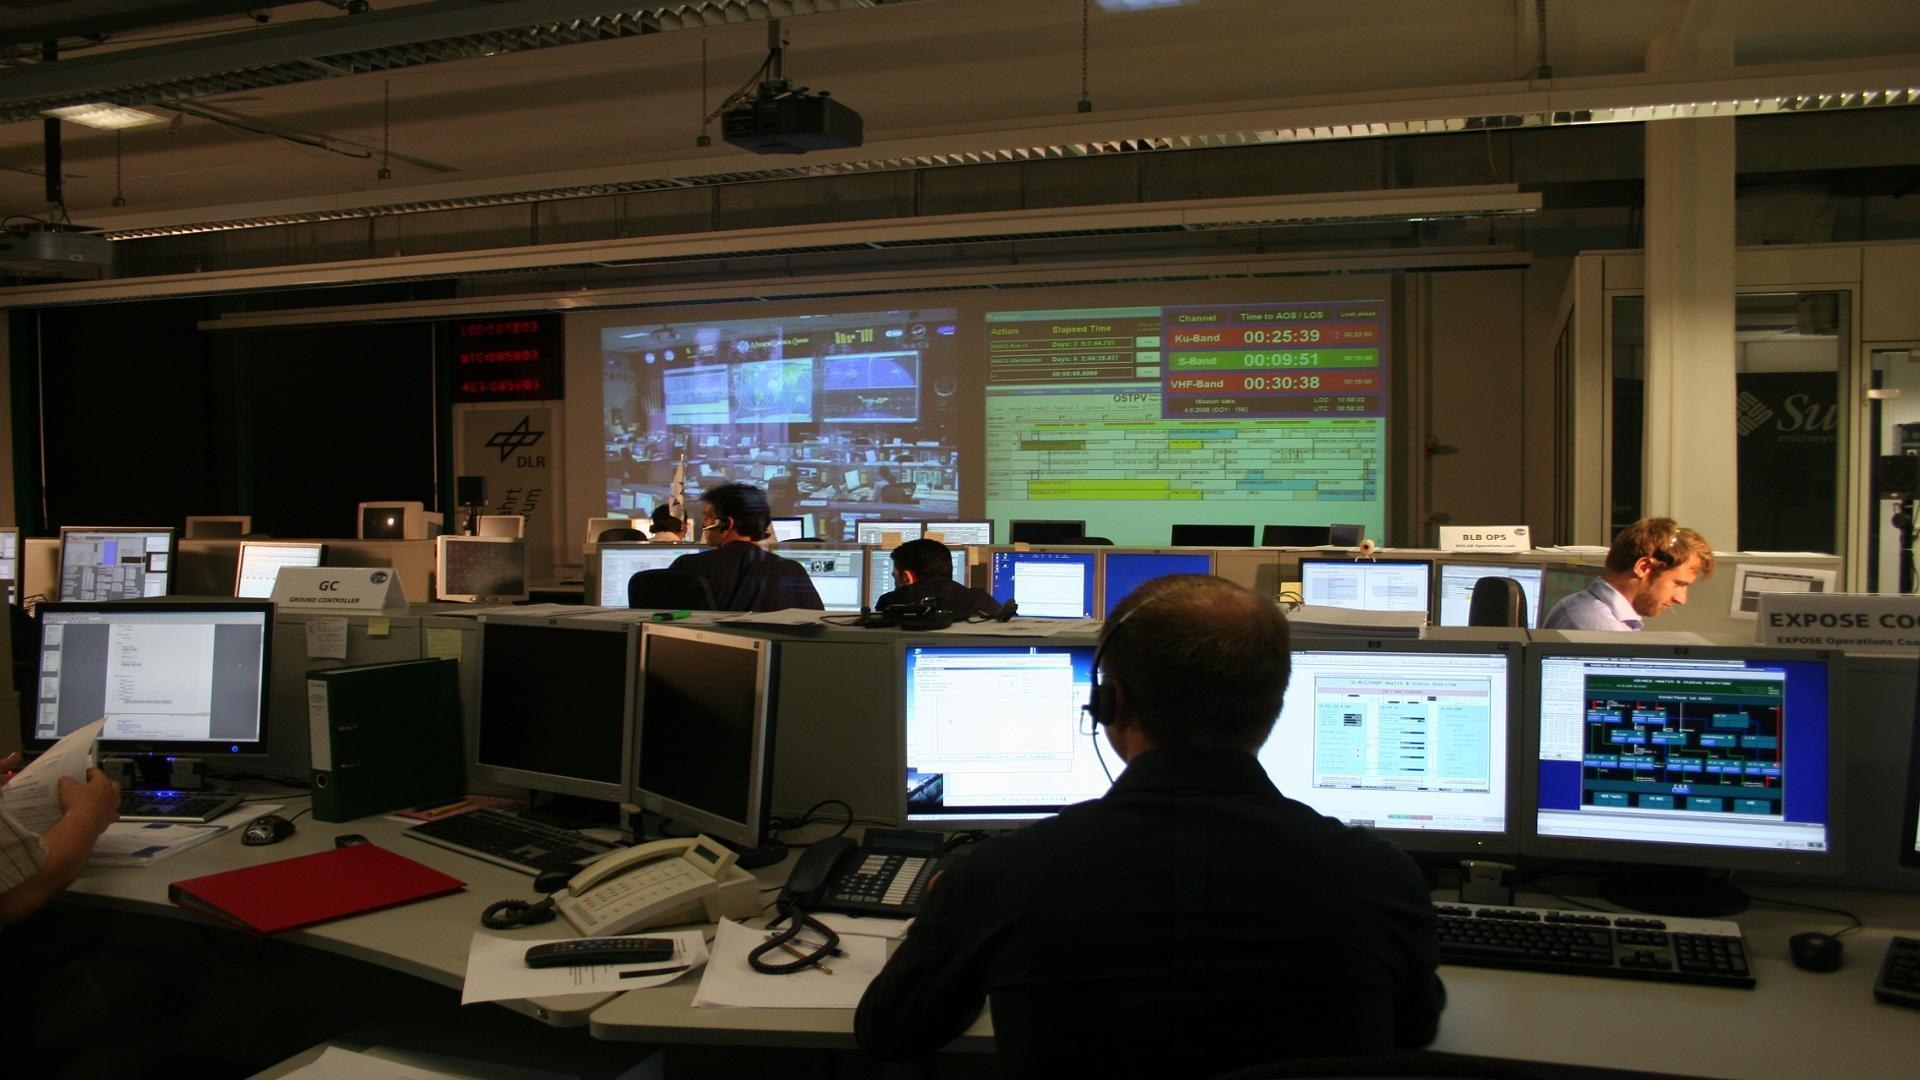 ISS systems and experiment operations in the Large Control Room